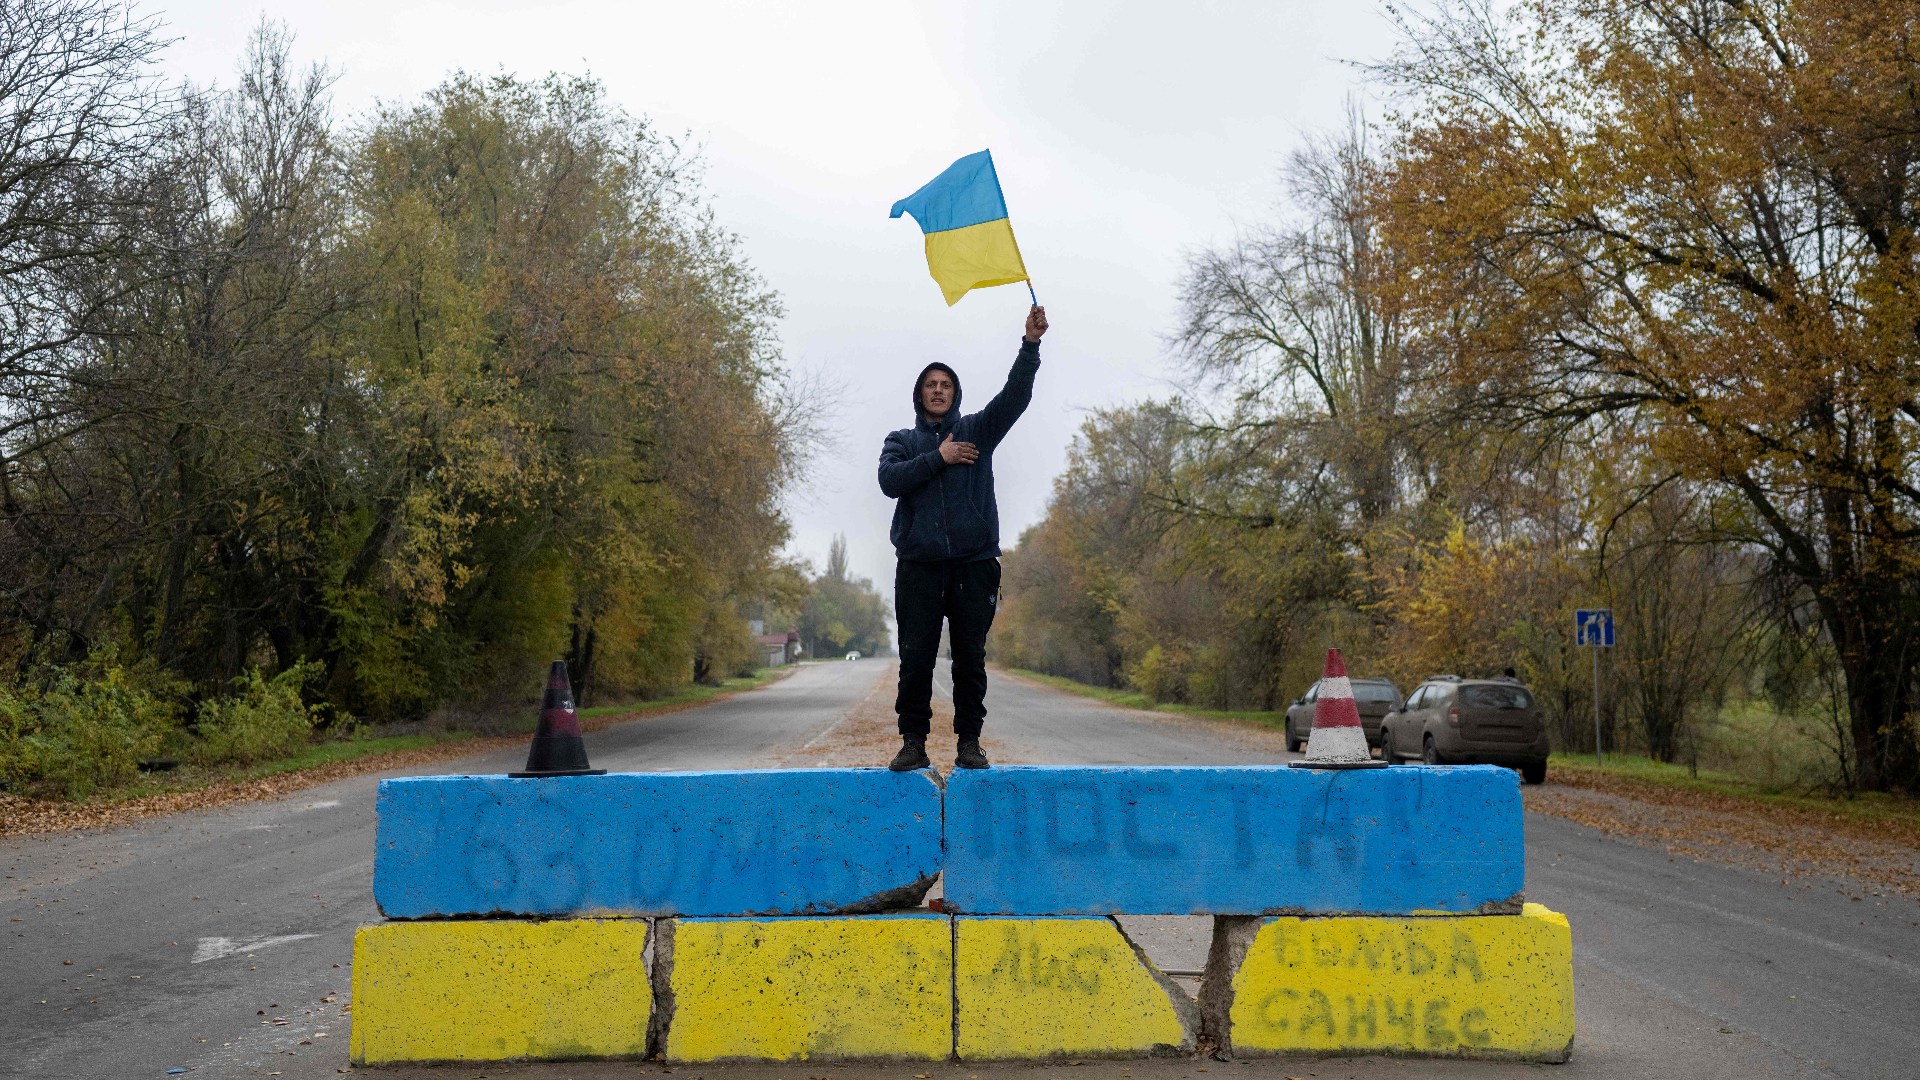 A resident of Kherson celebrates the liberation of the city in November 2022 at a former Russian checkpoint. Photos: Bulent Kilic/AFP/Getty